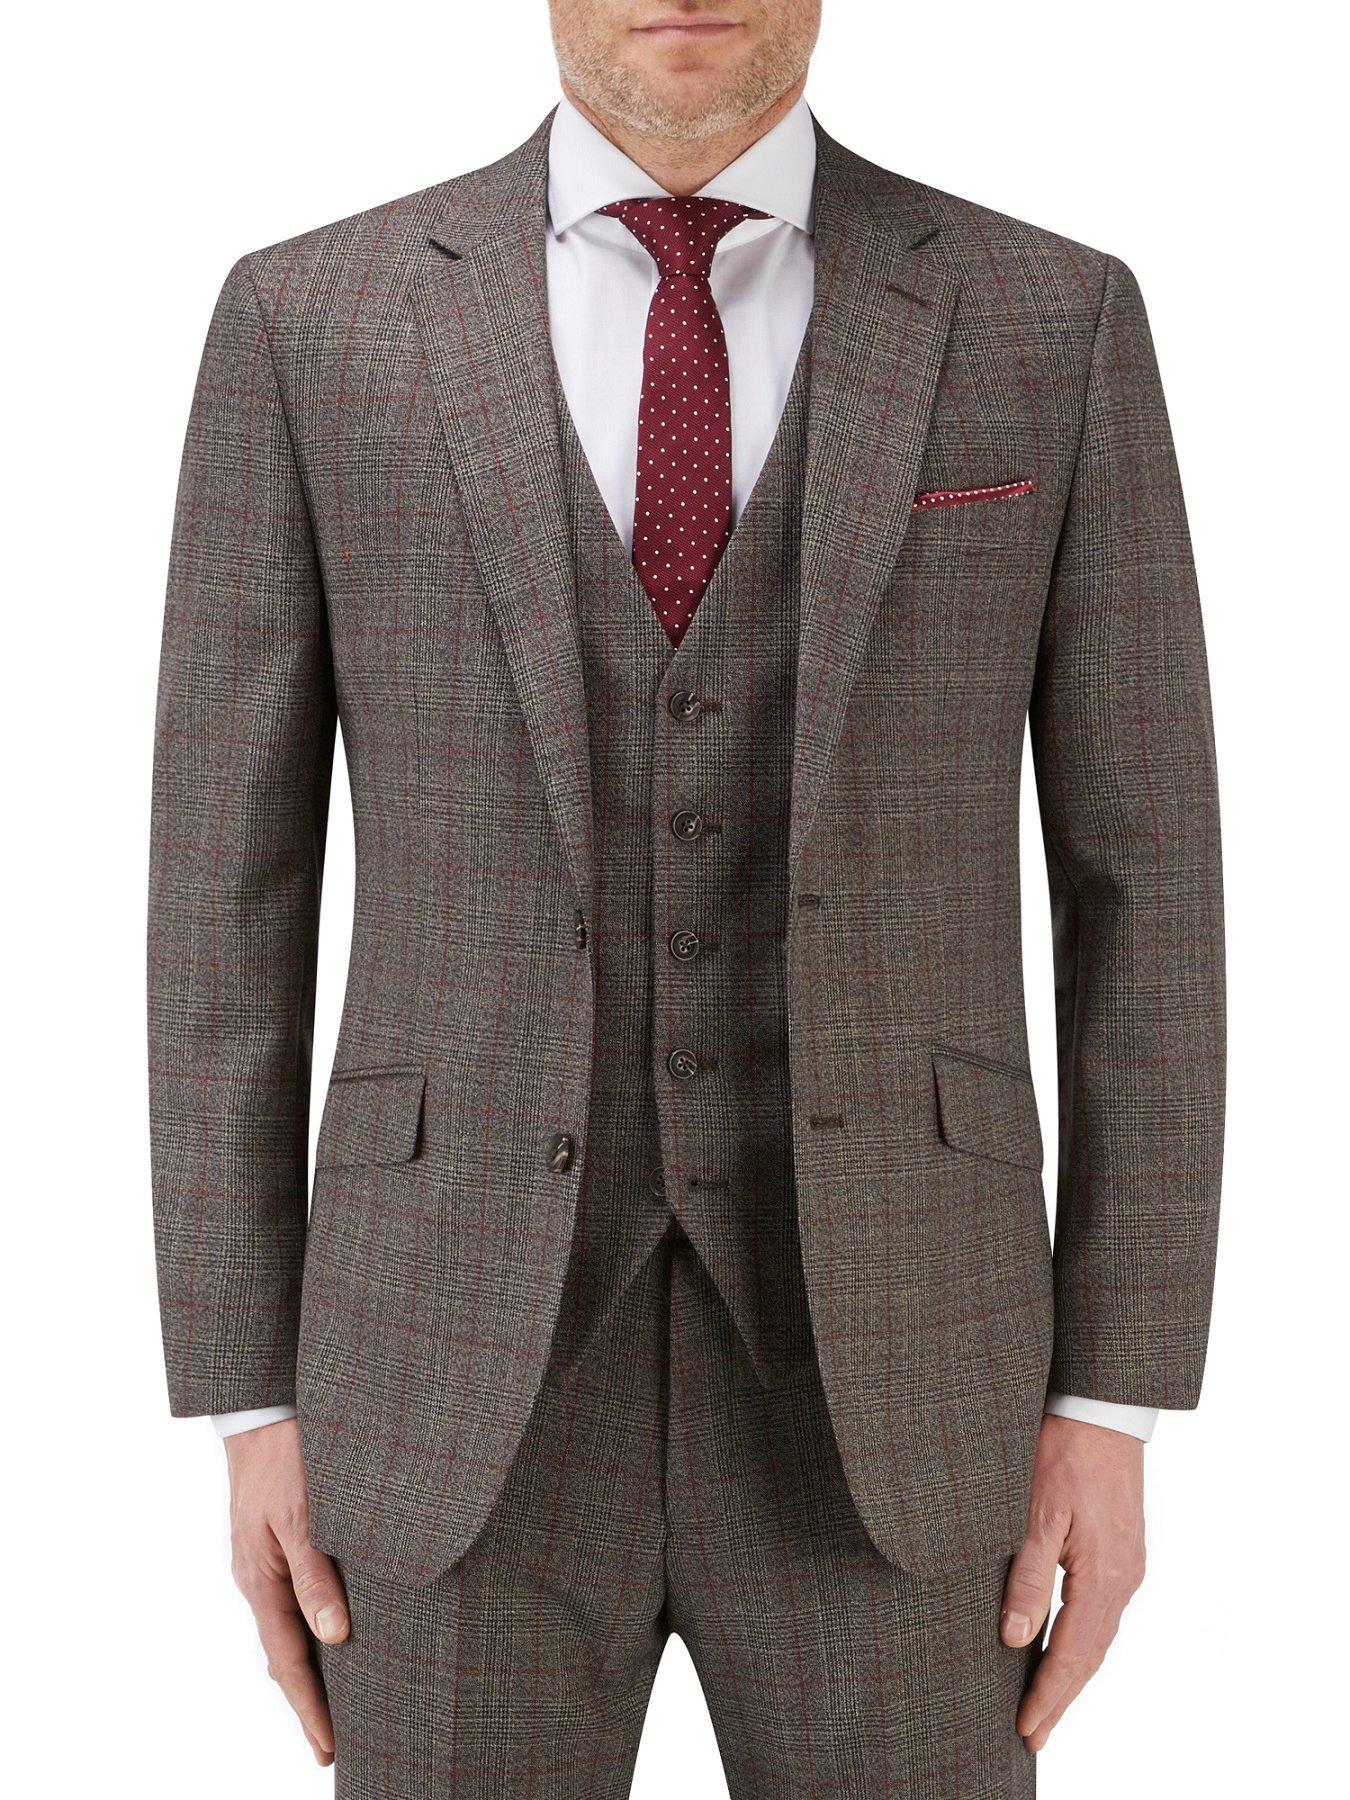 Suits & Blazers Havlin Tailored Fit Overcheck Jacket - Grey/Red